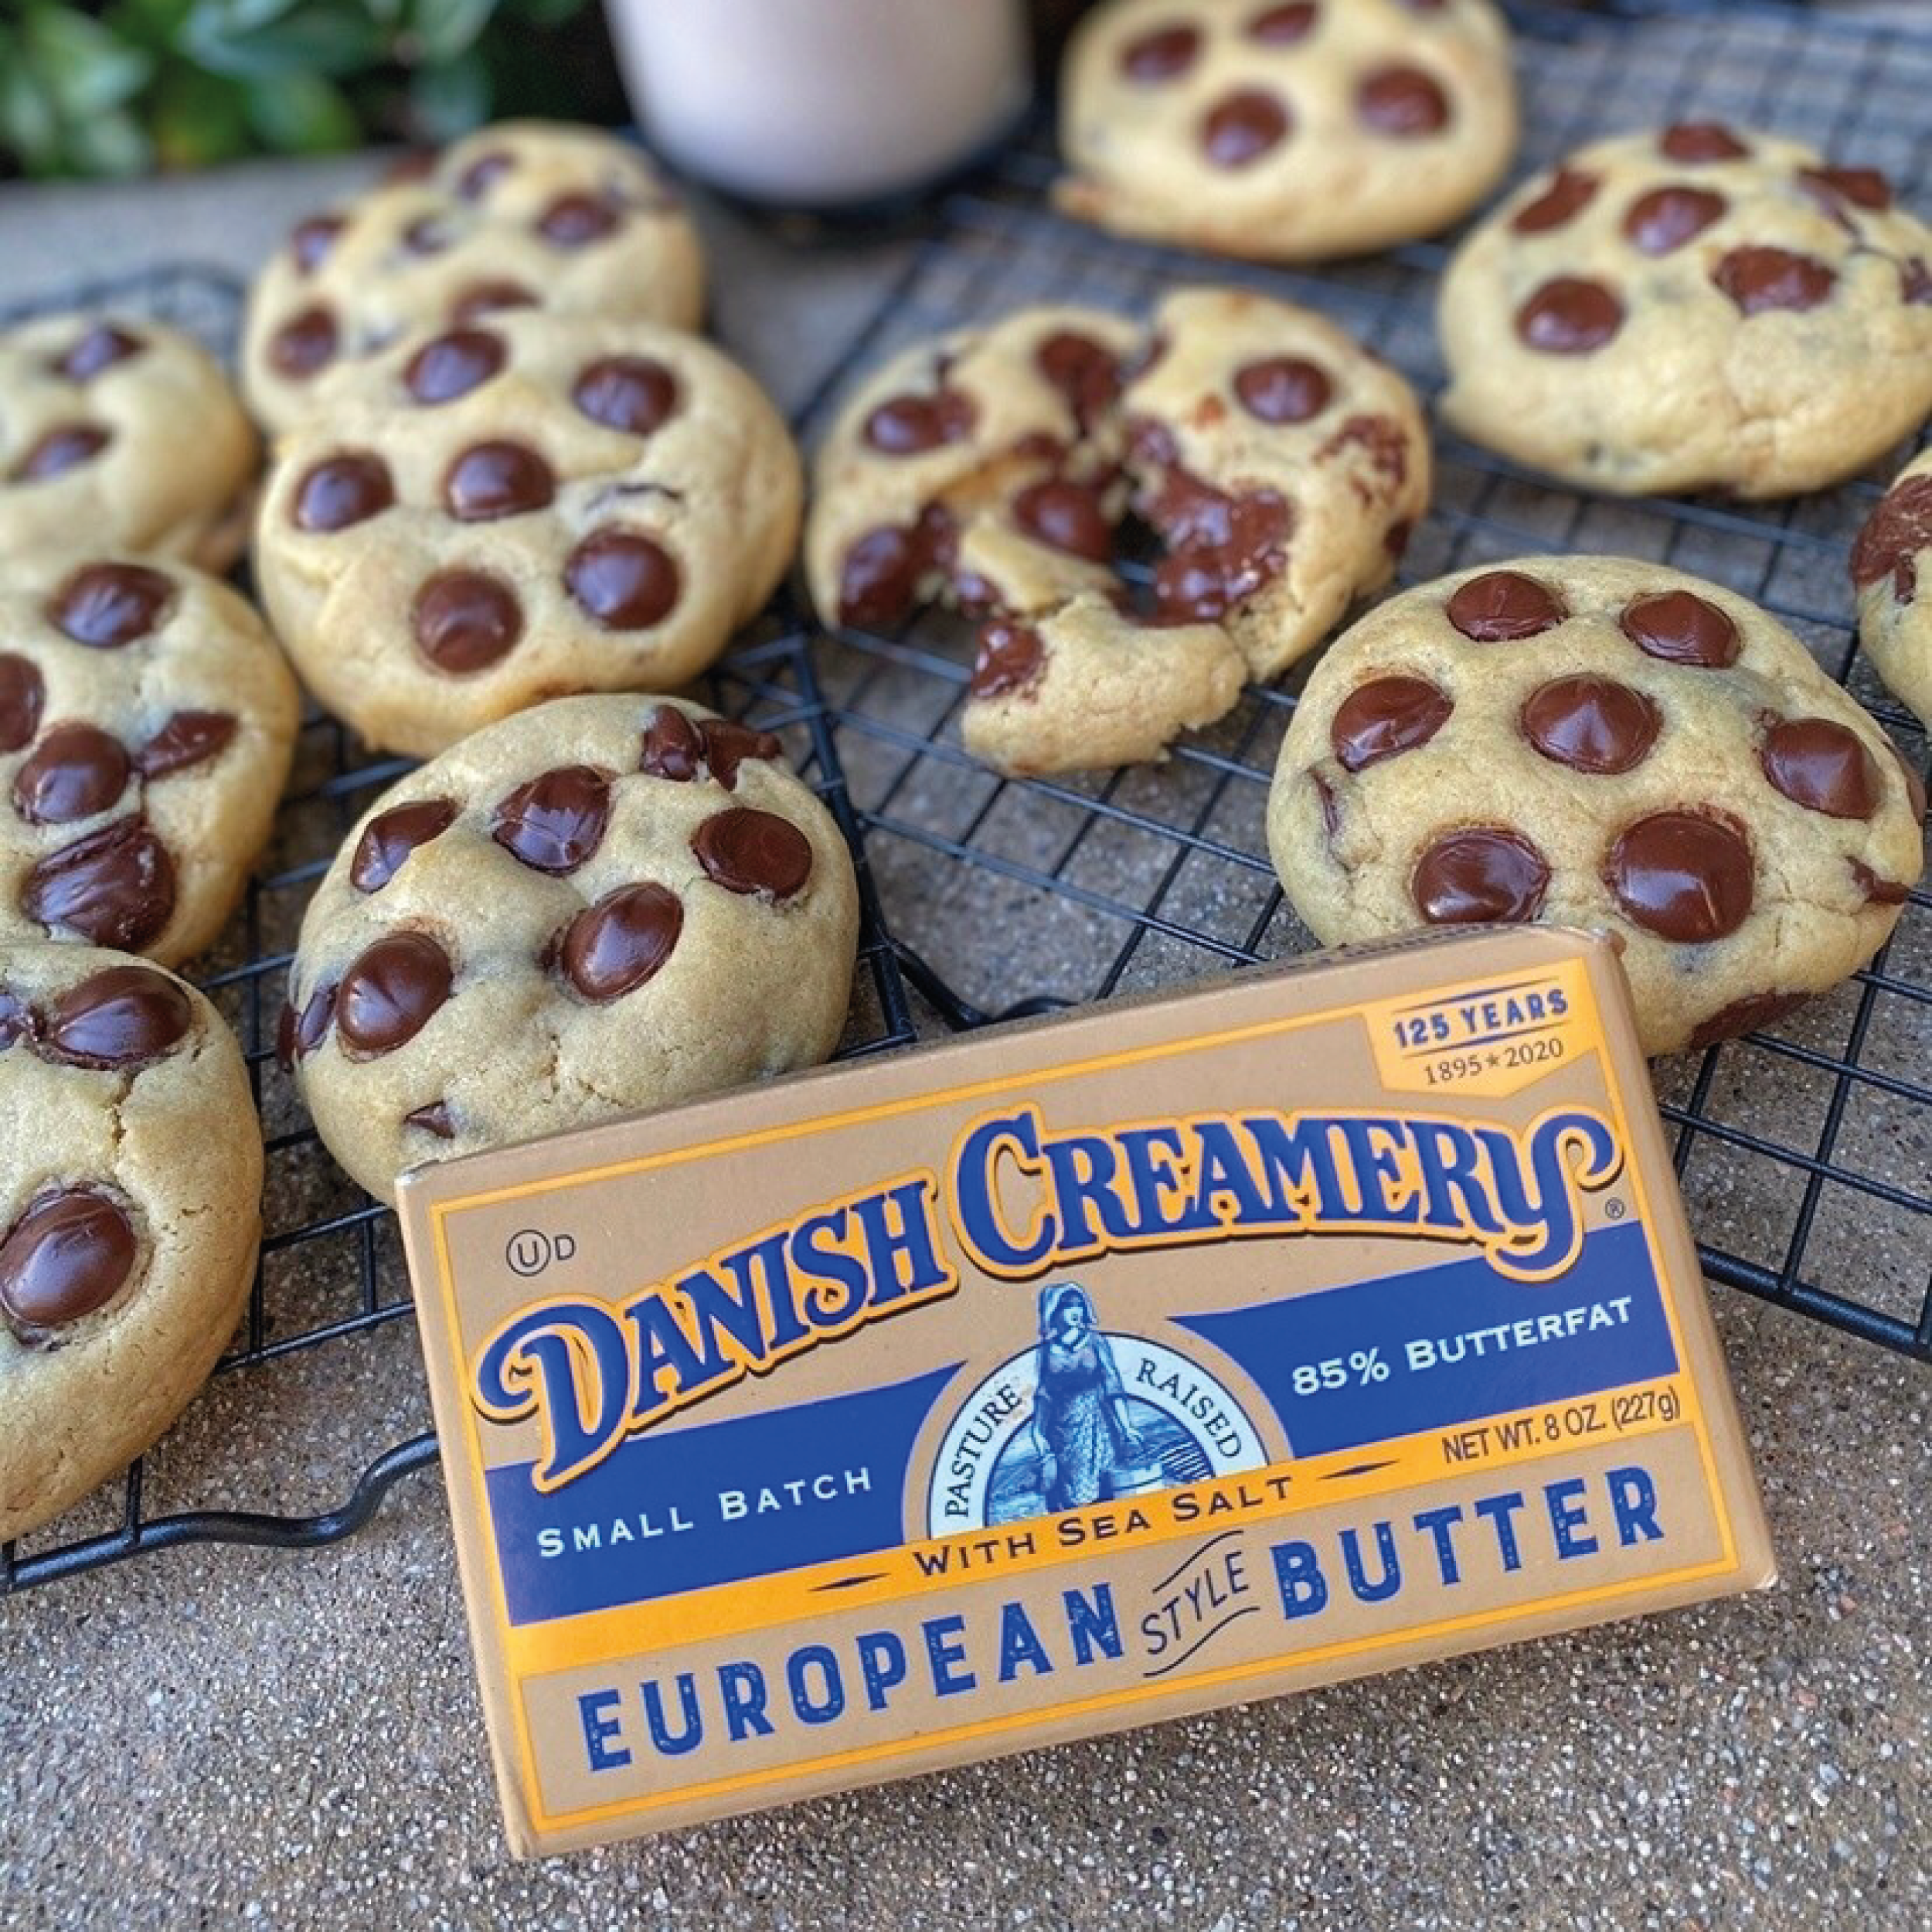 Danish creme cookies and a box of European butter, a delightful combination for a sweet treat.